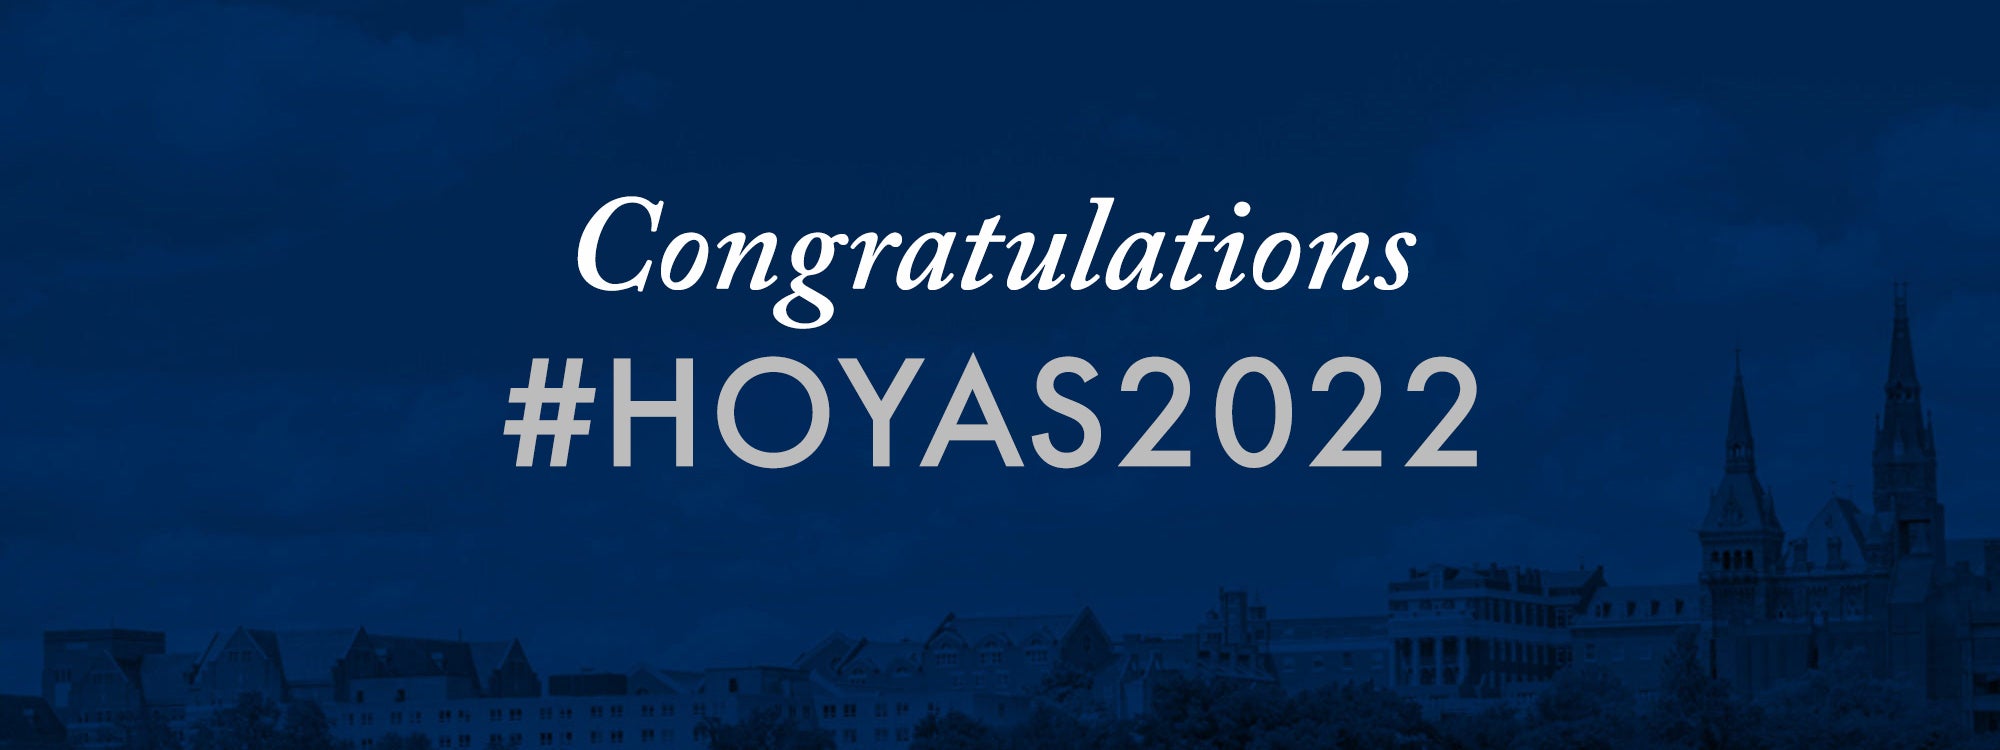 Blue graphic with text "Congratulations #Hoyas2022"